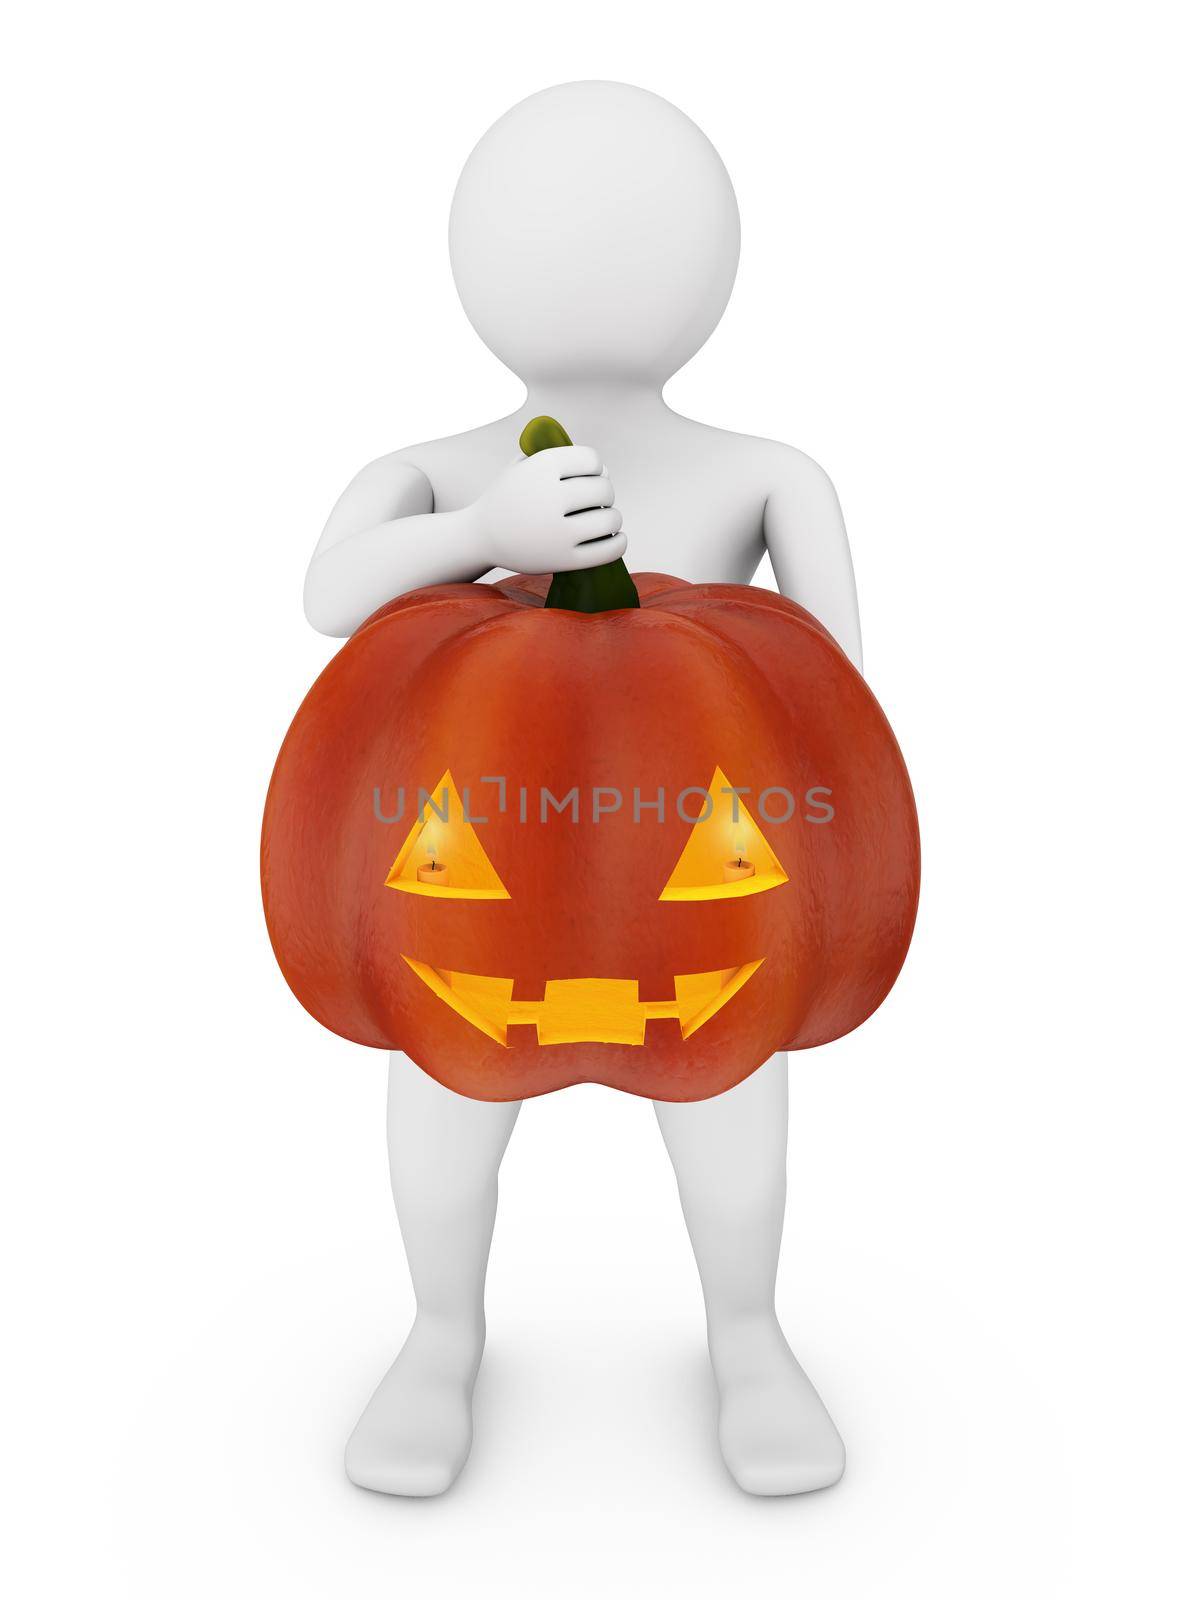 man with a pumpkin for a holiday helloween with candles inside